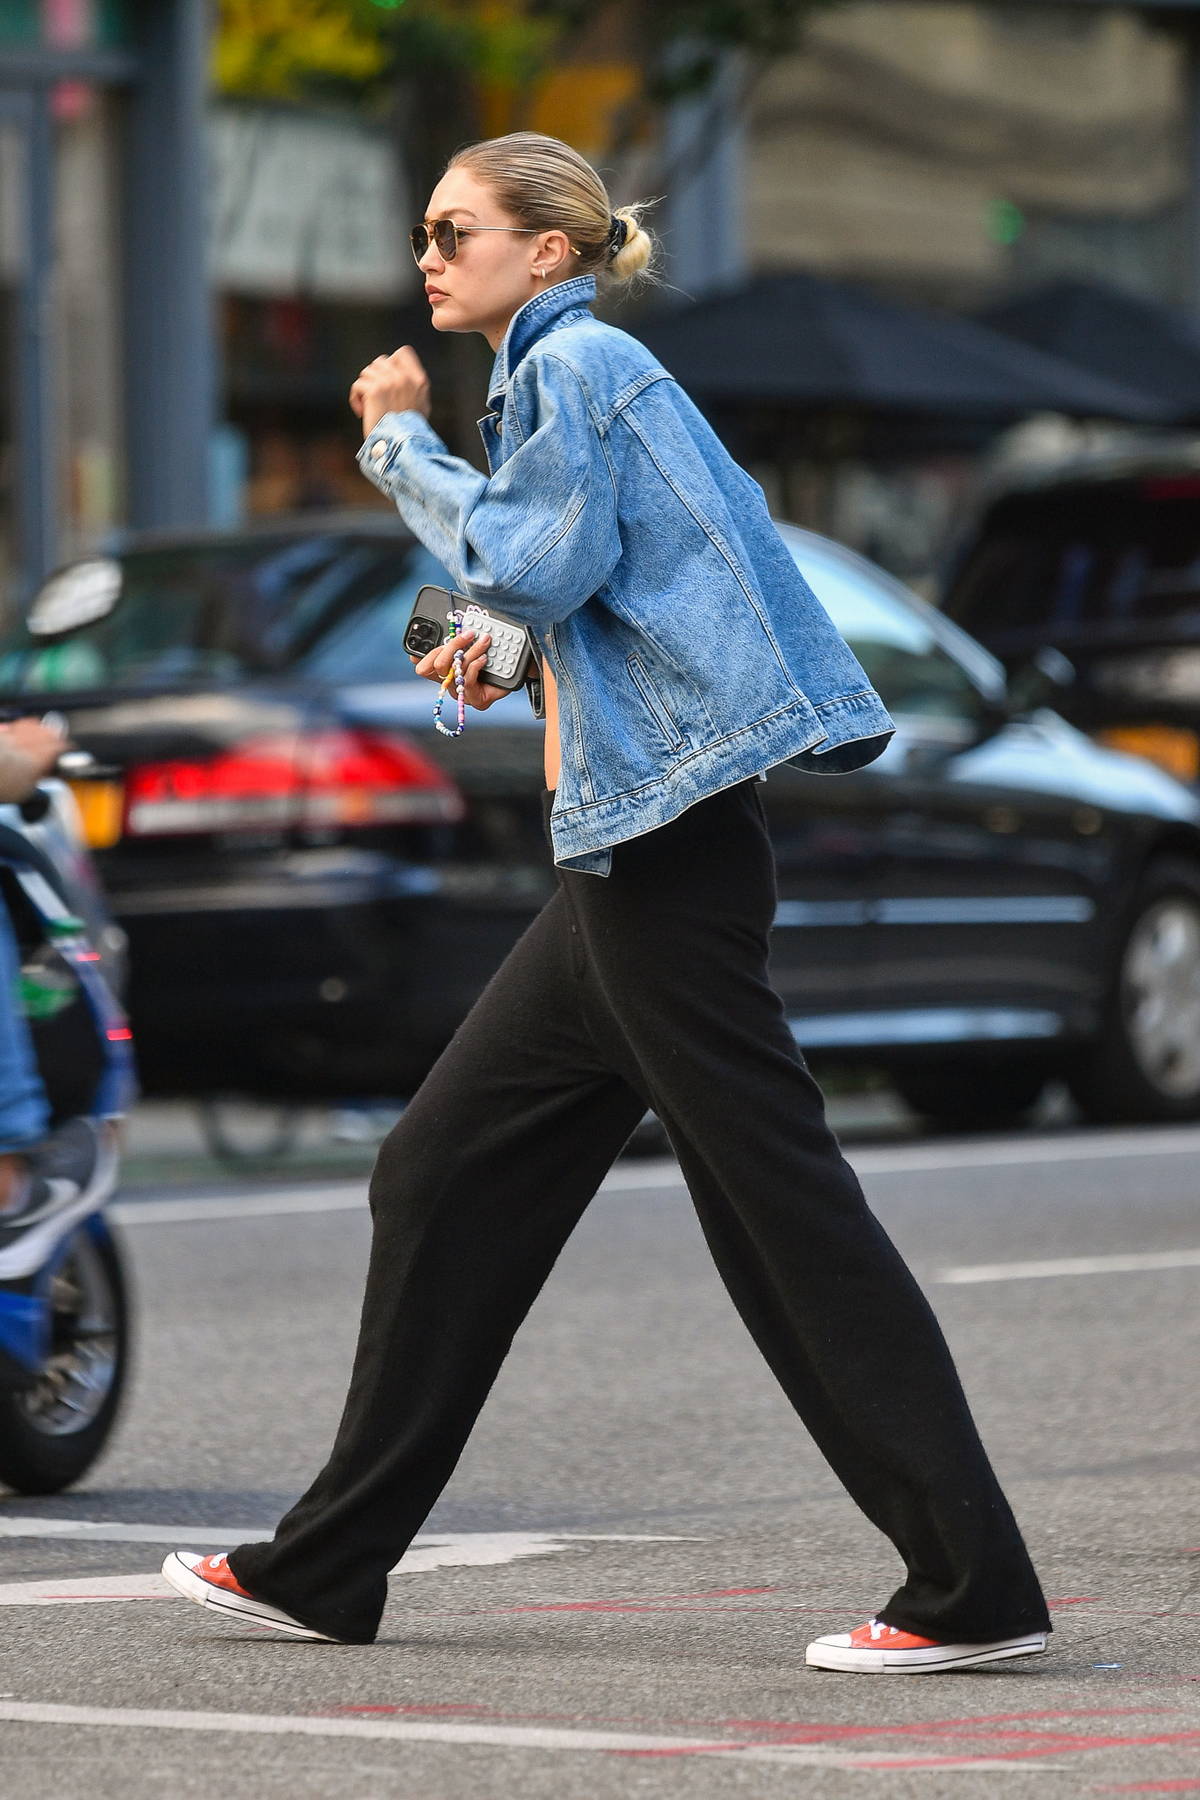 Gigi Hadid keeps things casual in a denim jacket and black joggers